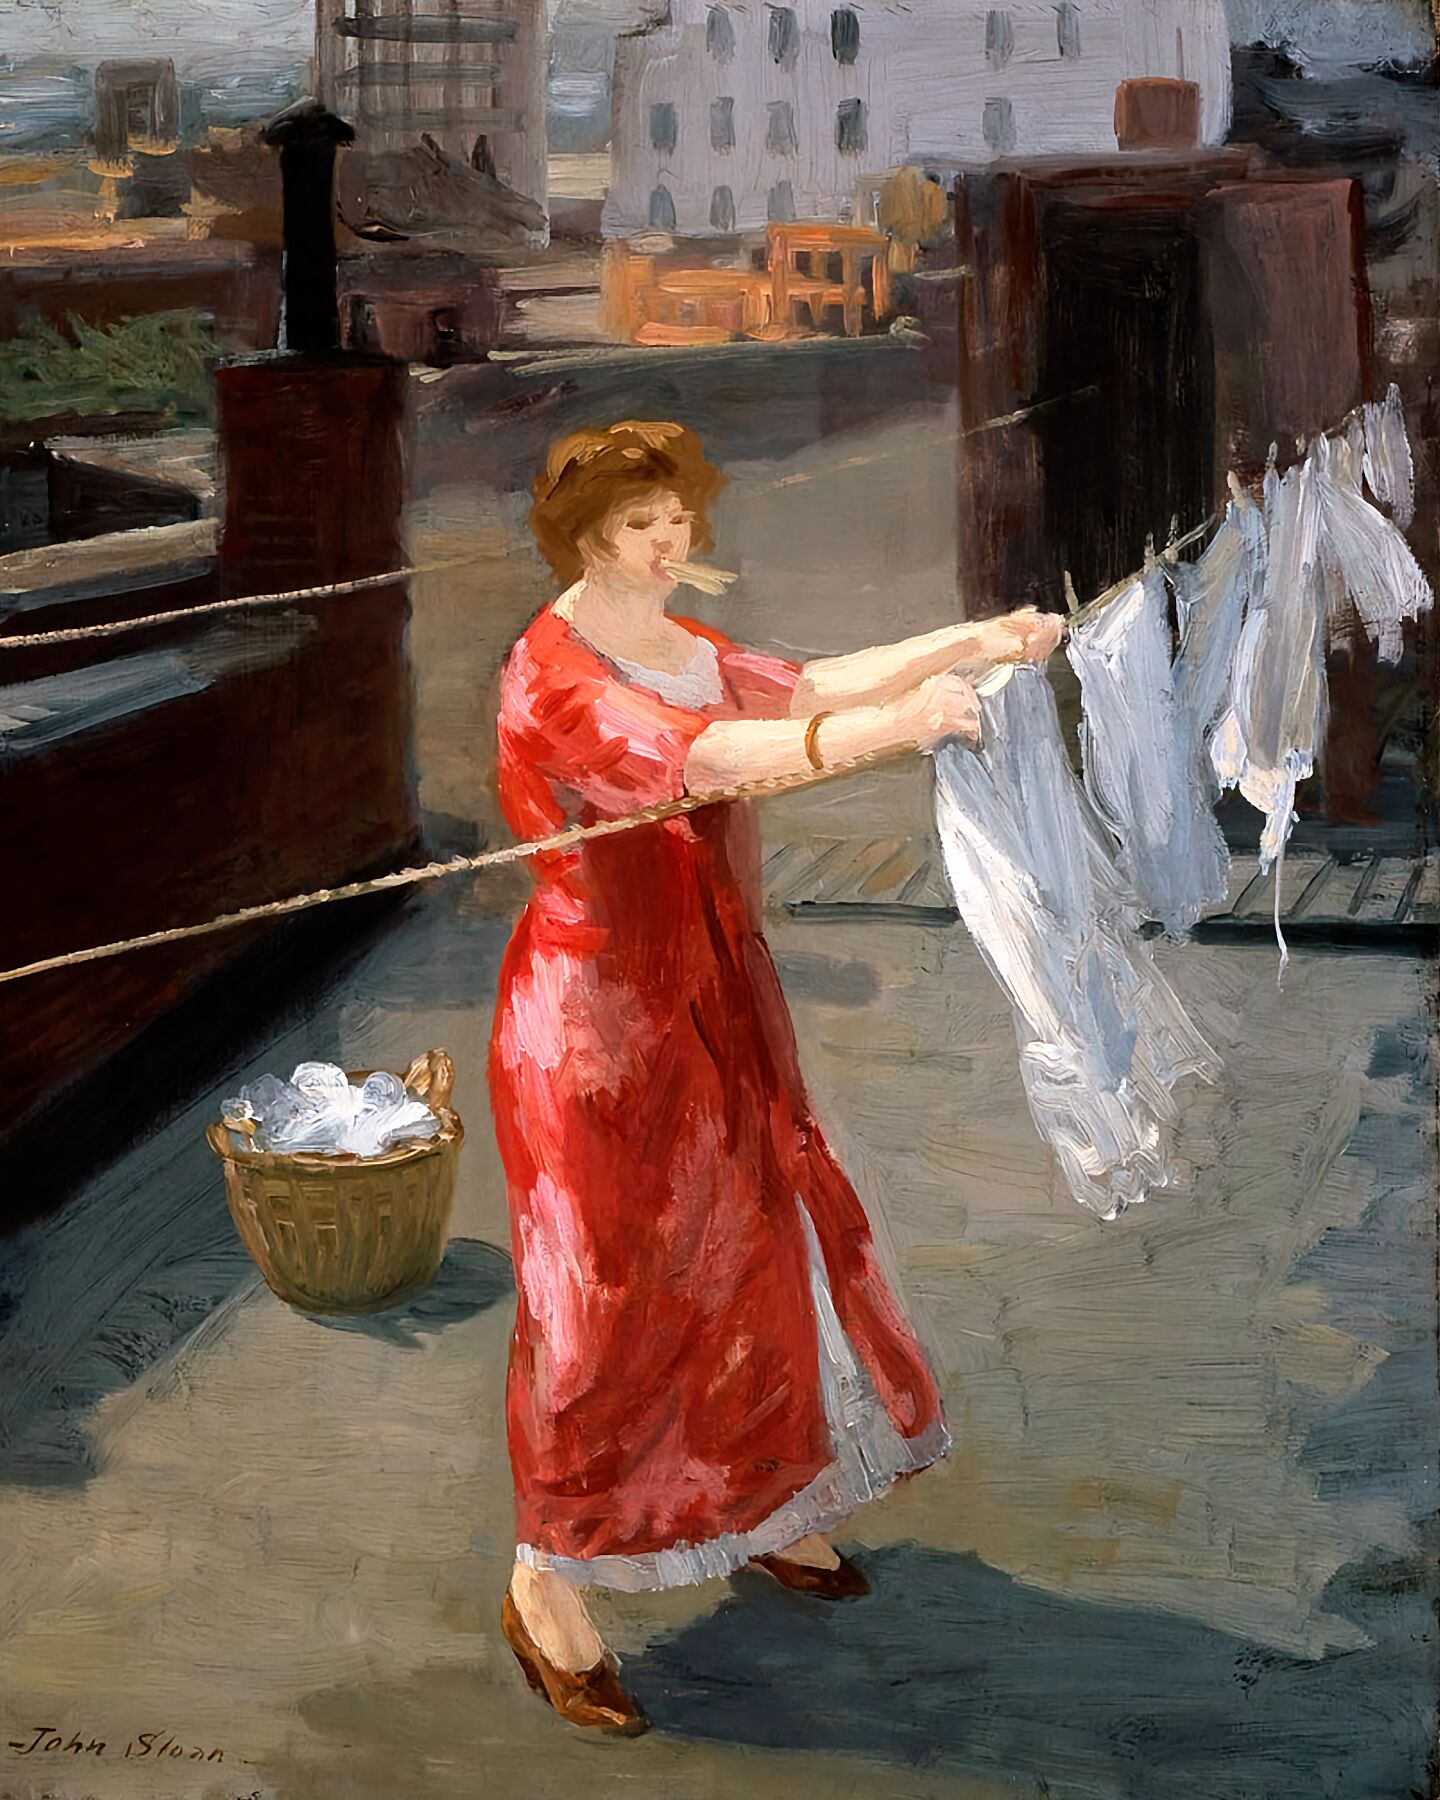 Red Kimono on the Roof by John Sloan - 1912